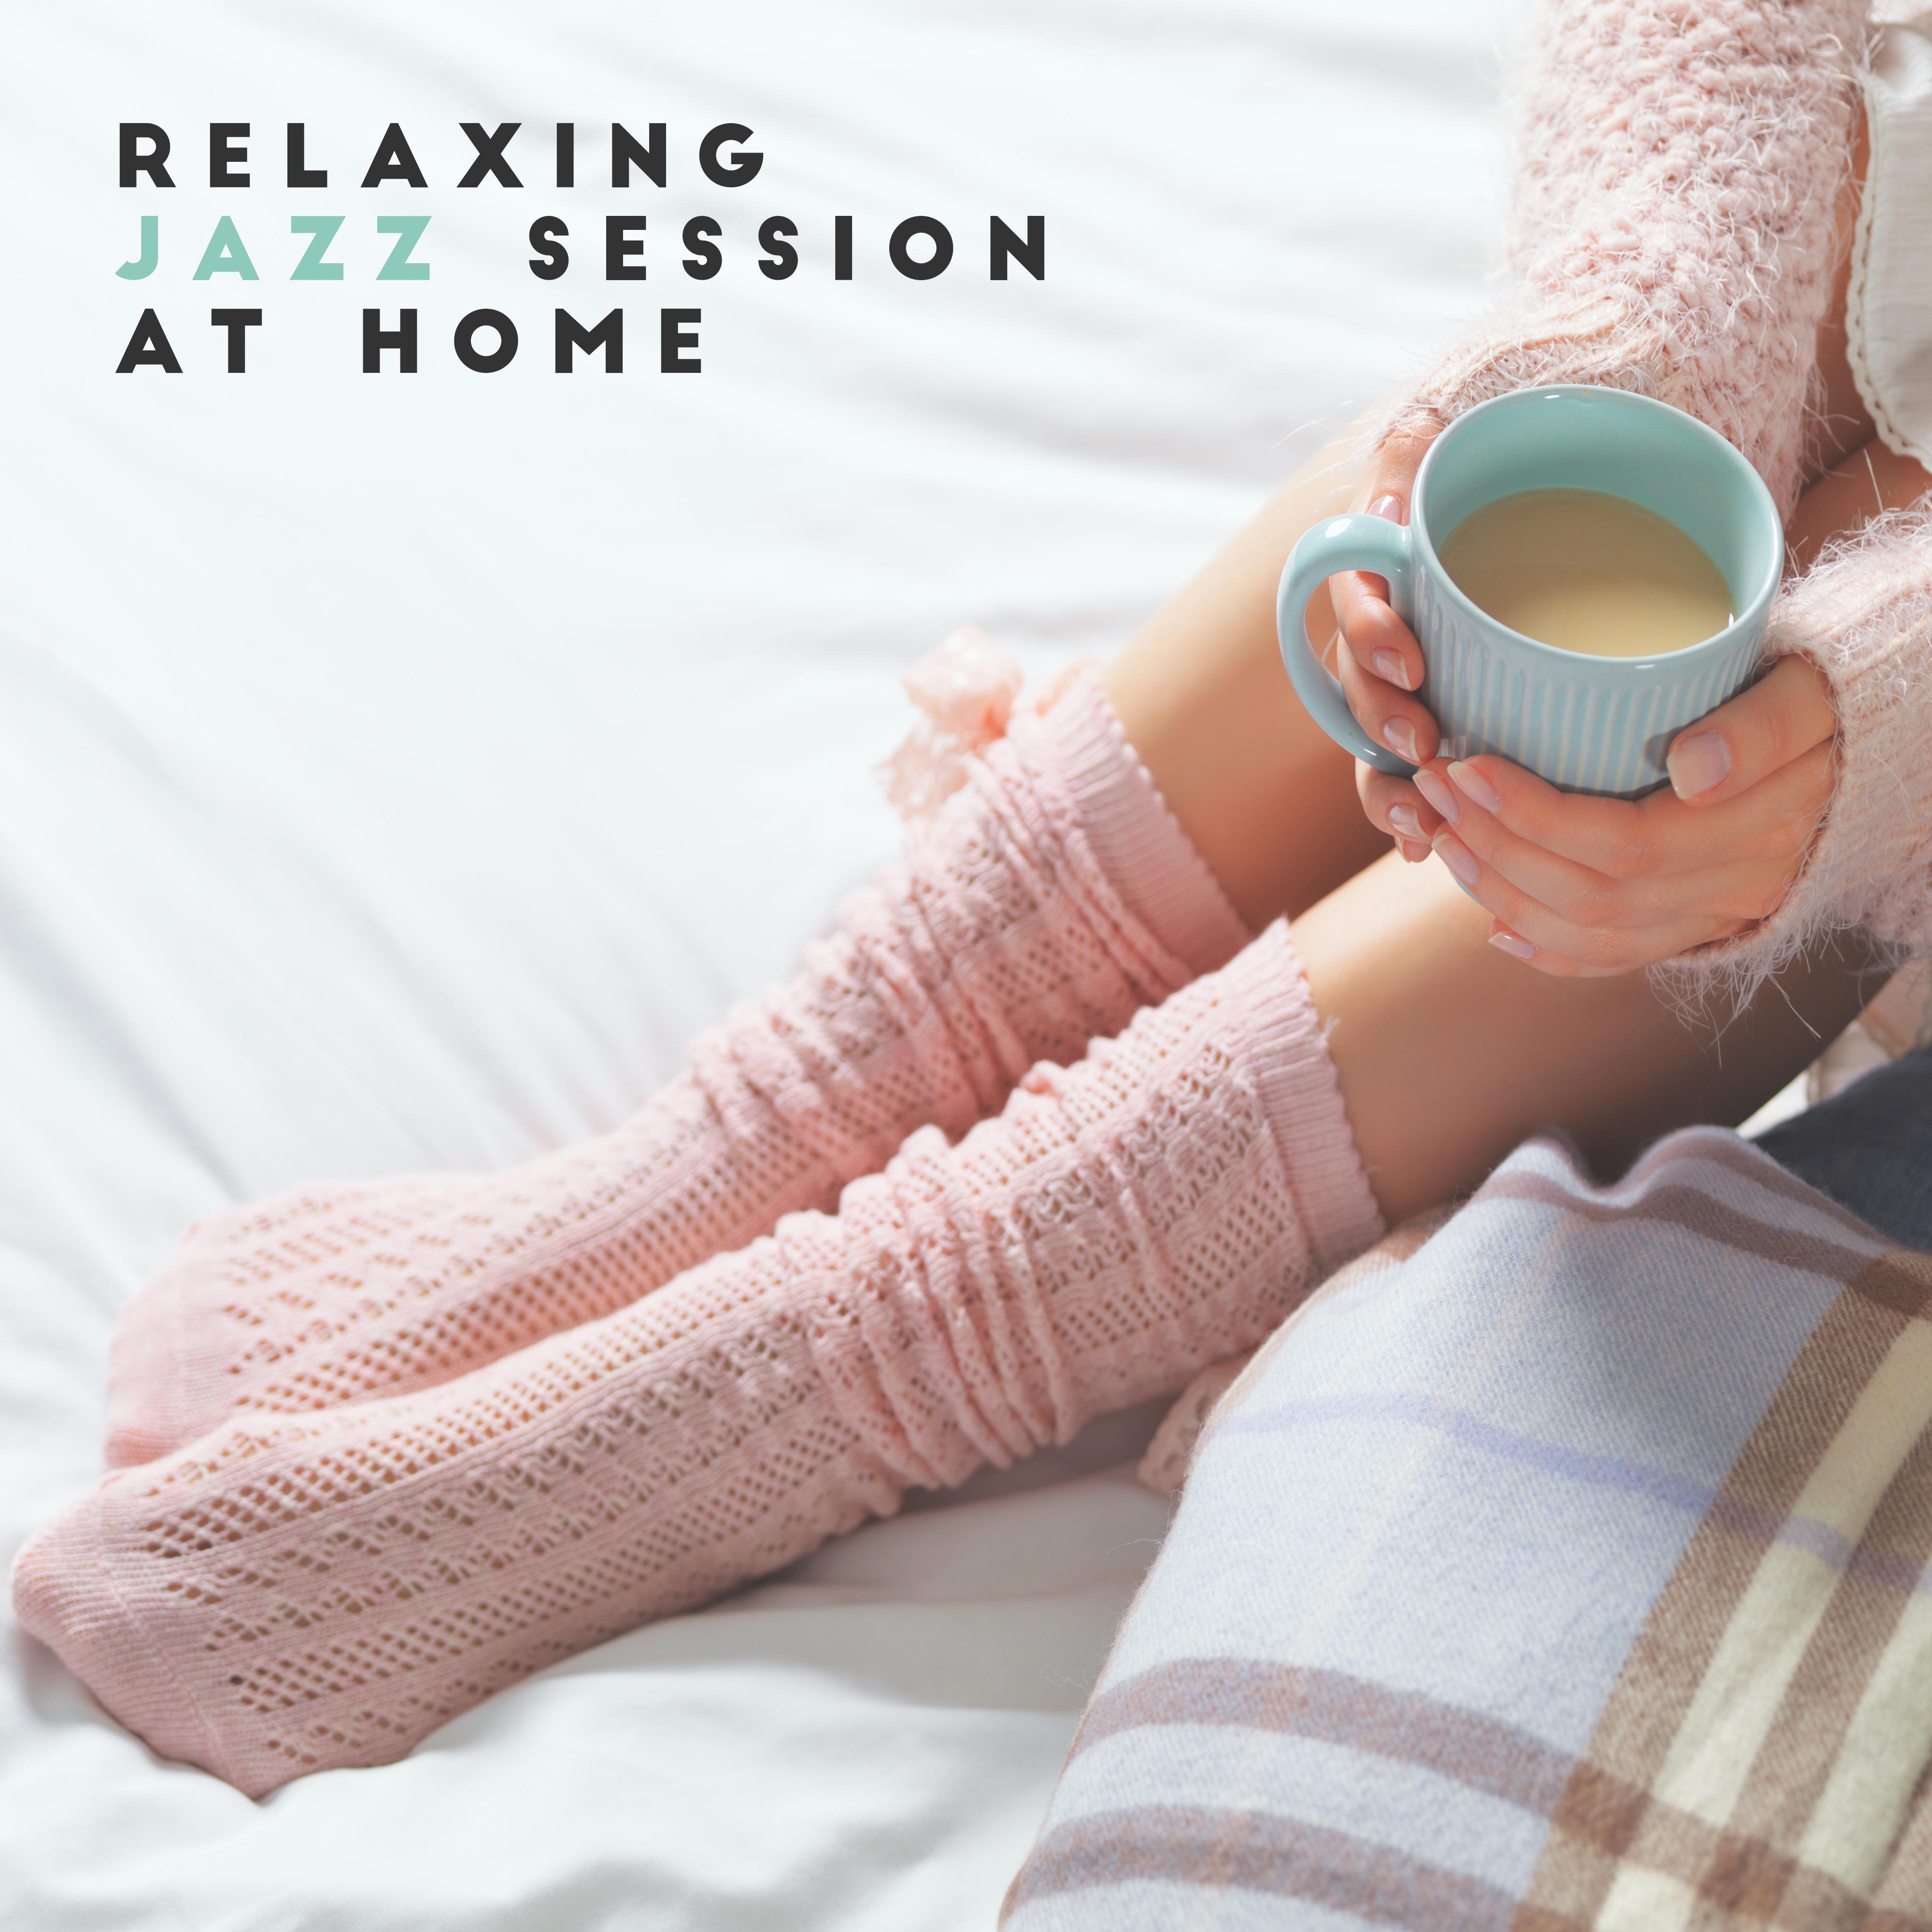 Relaxing Jazz Session at Home: 15 Smooth Jazz Songs for Relax, Calming Down & Stress Reduce